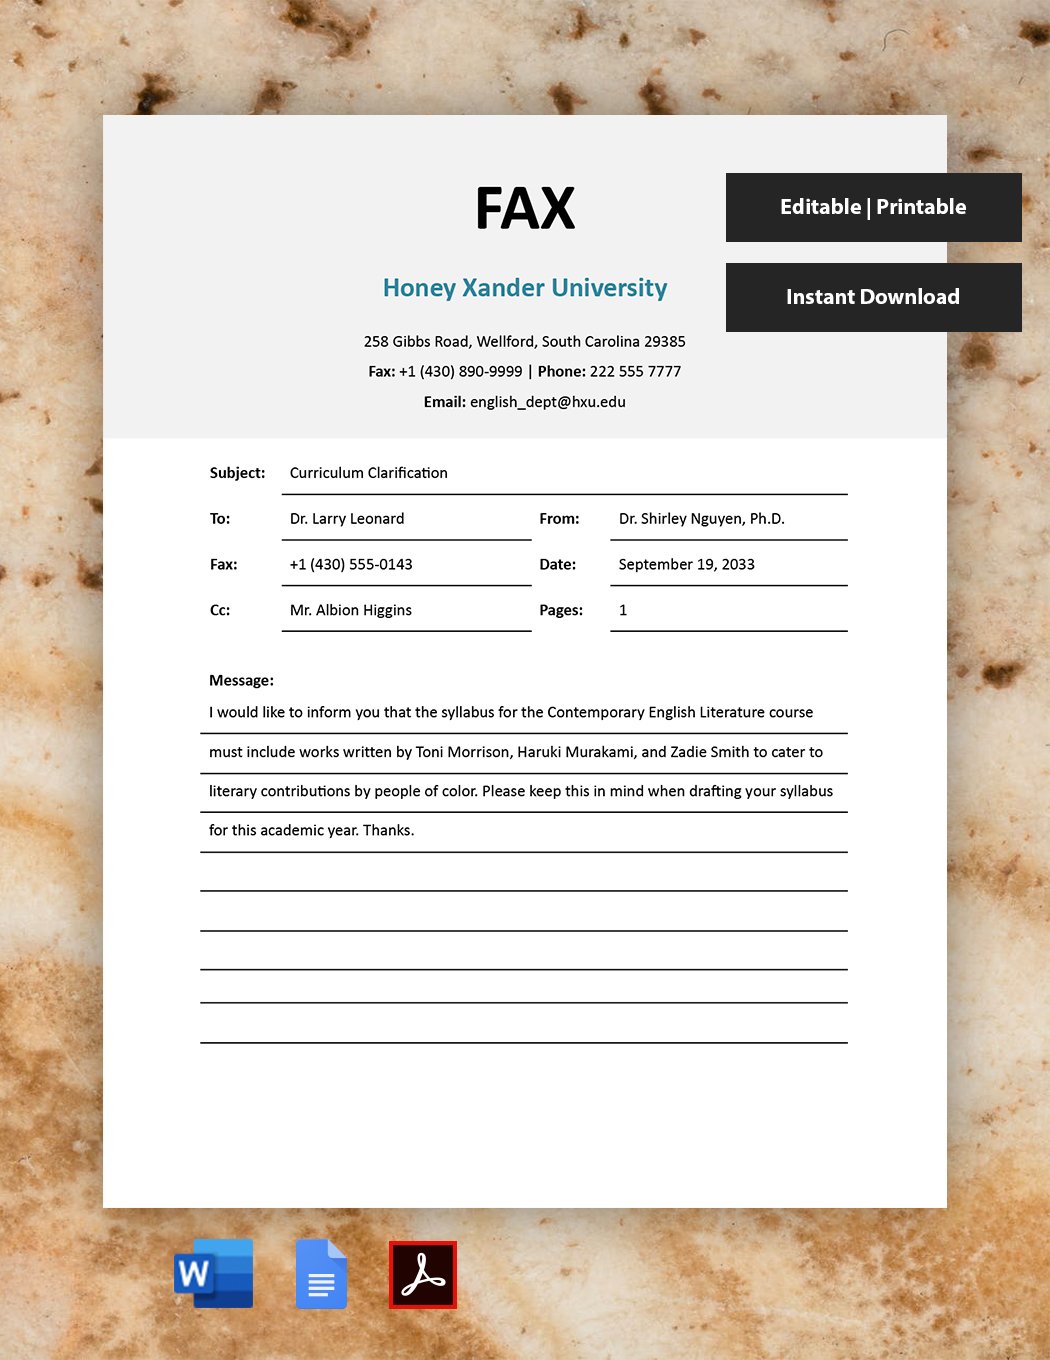 education-fax-cover-sheet